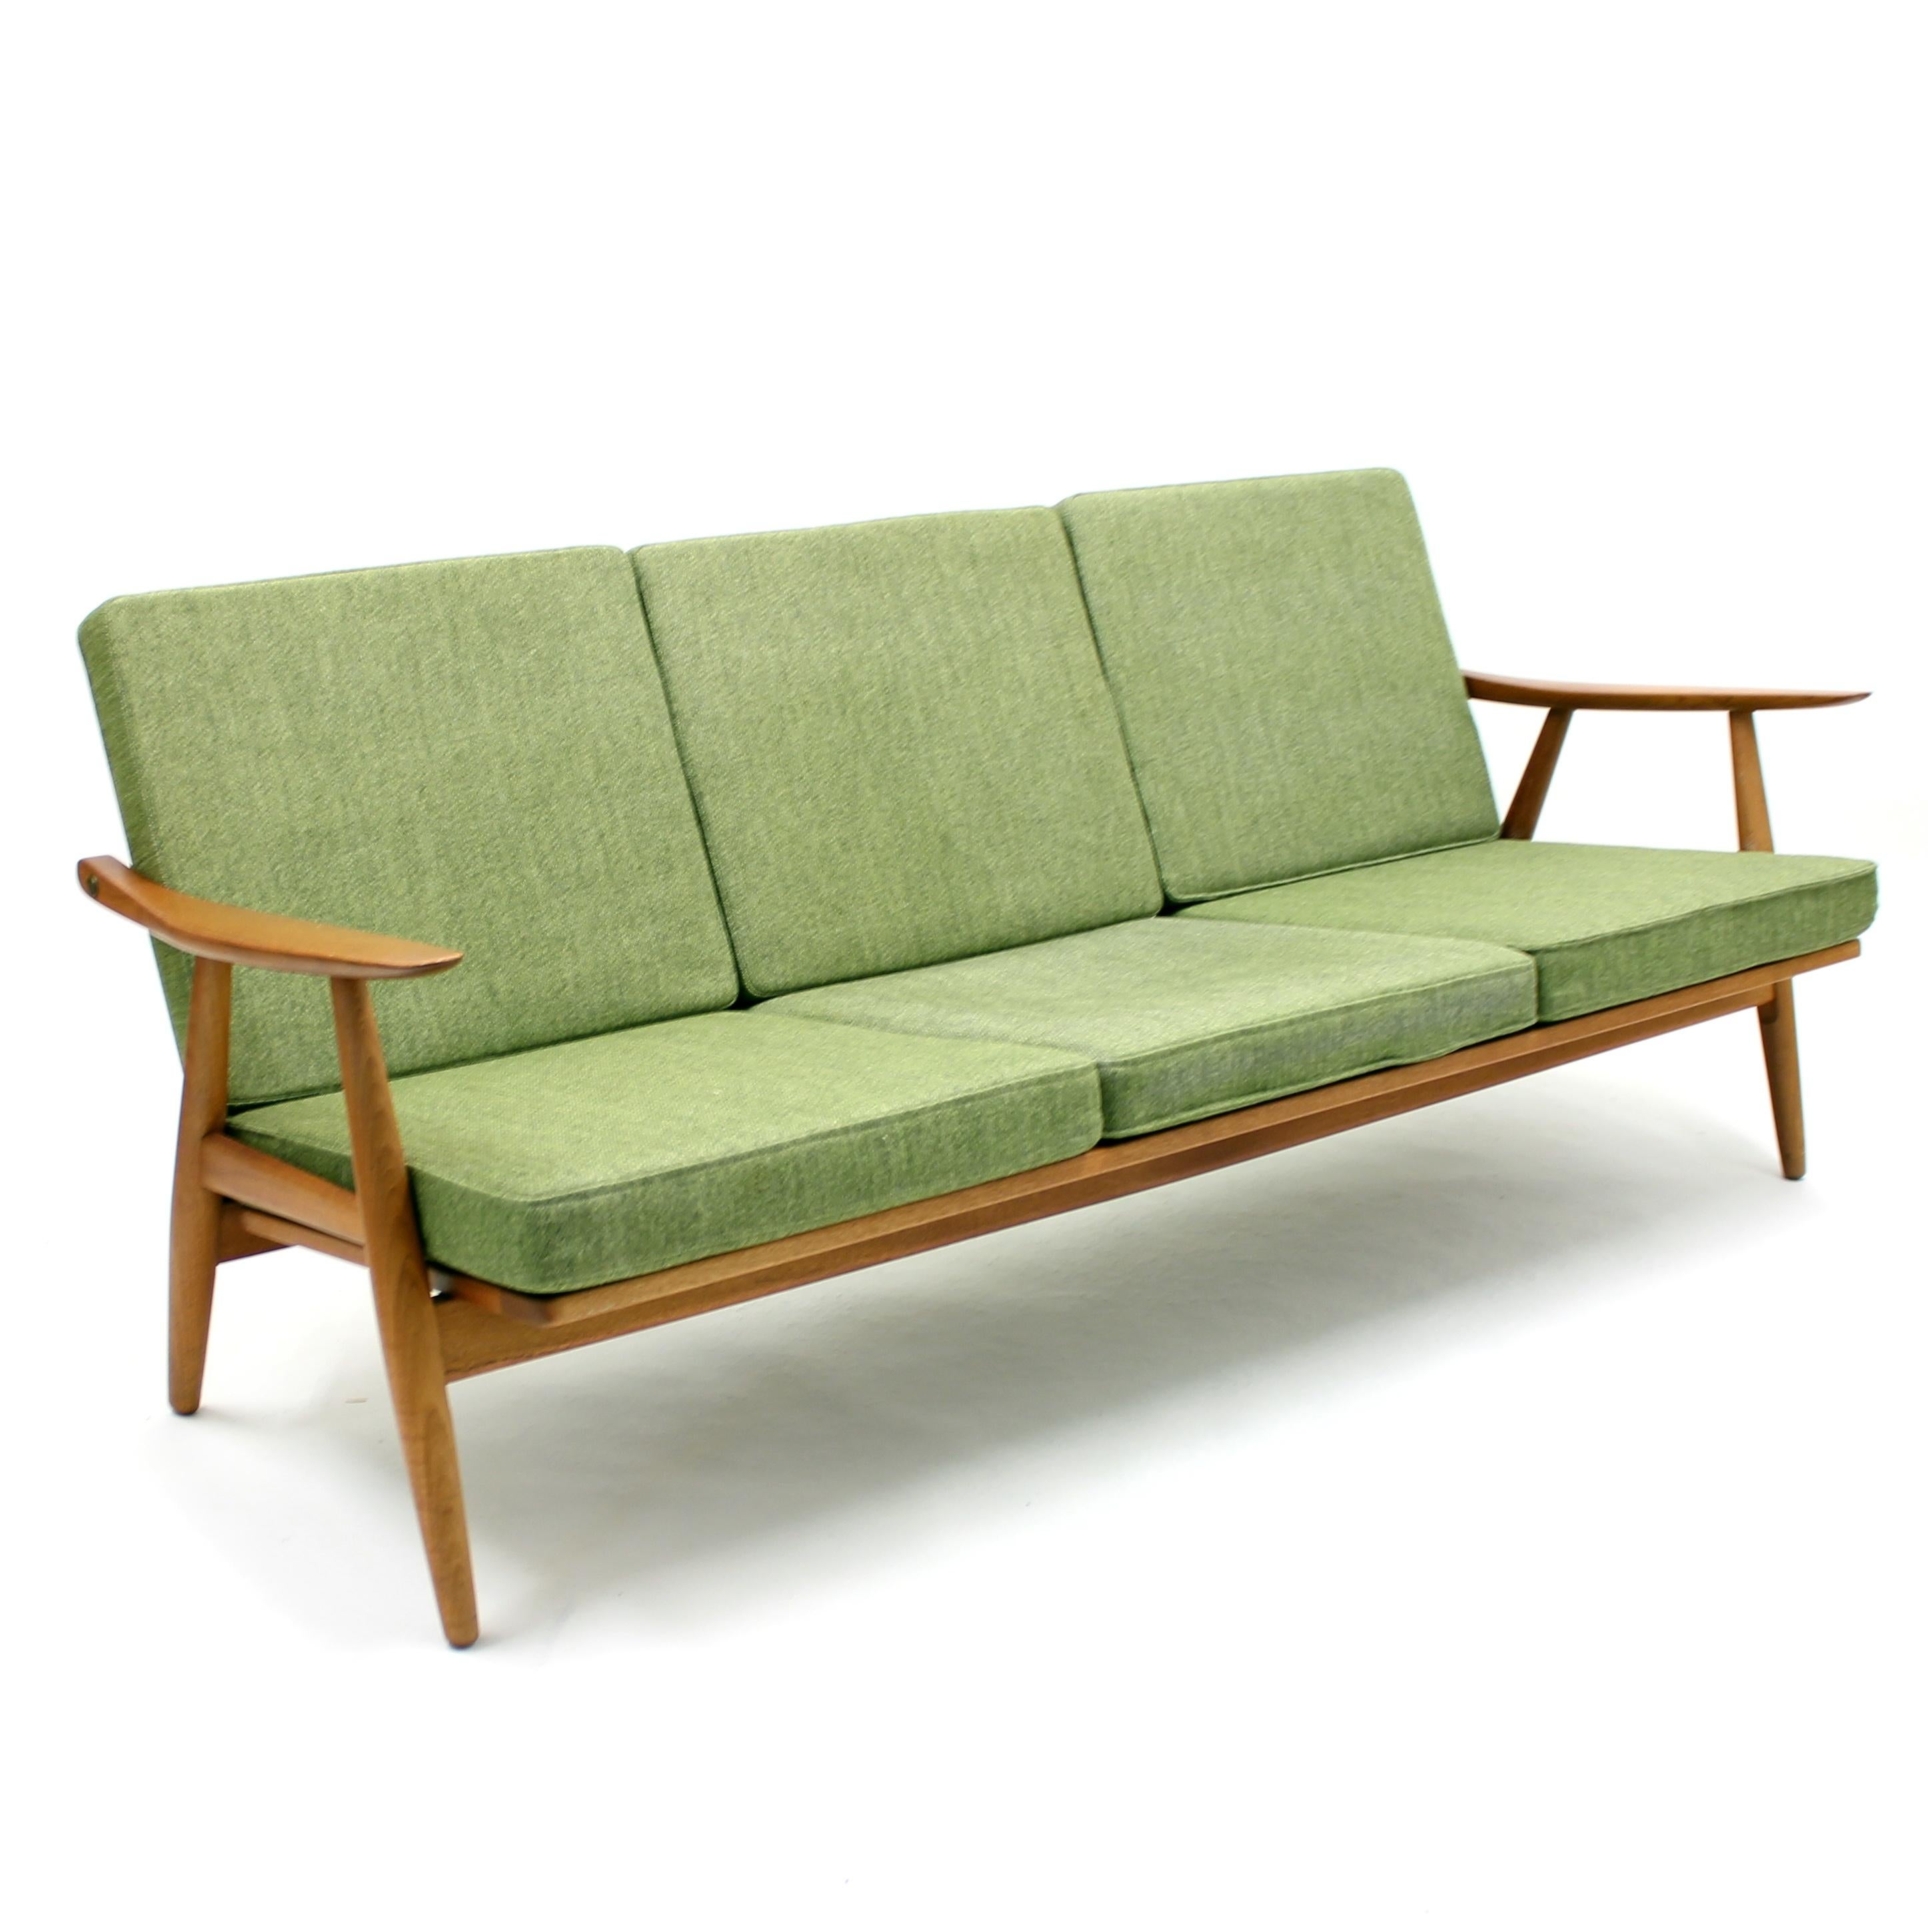 Semi rare 1960s 3-seater sofa model GE 270 in teak with original green fabric upholstery designed by Hans J. Wegner for GETAMA. Good untouched original vintage condition with ware consistent with age and us. New supporting hemp webbing under the